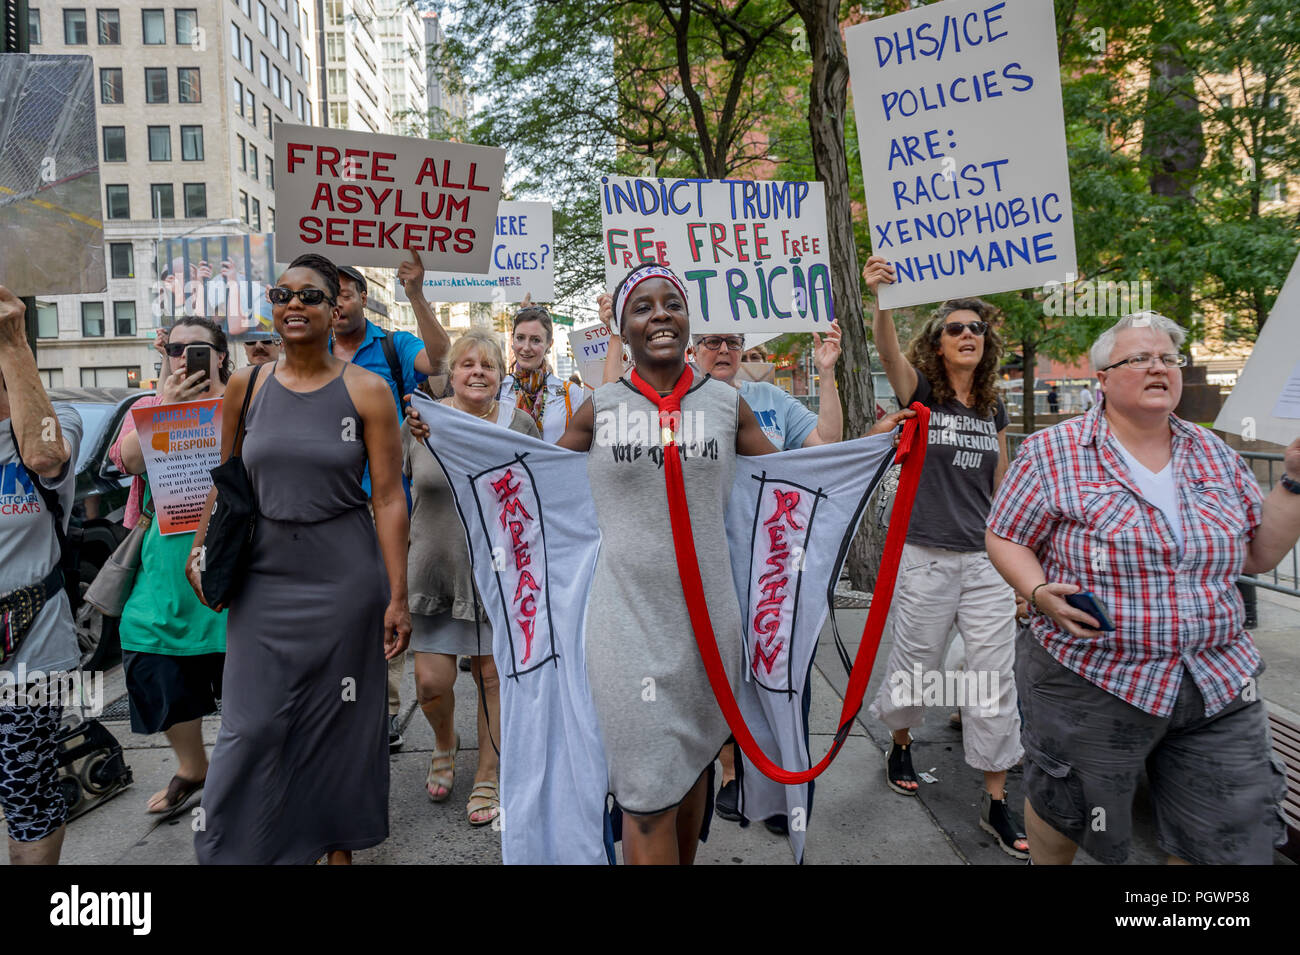 New York, United States. 28th Aug, 2018. Patricia Okoumou, the woman who scaled the Statue of Liberty, headed back to court on August 28, 2018 for a procedural hearing to schedule Okoumou's trial date for early November. Credit: Erik McGregor/Pacific Press/Alamy Live News Stock Photo